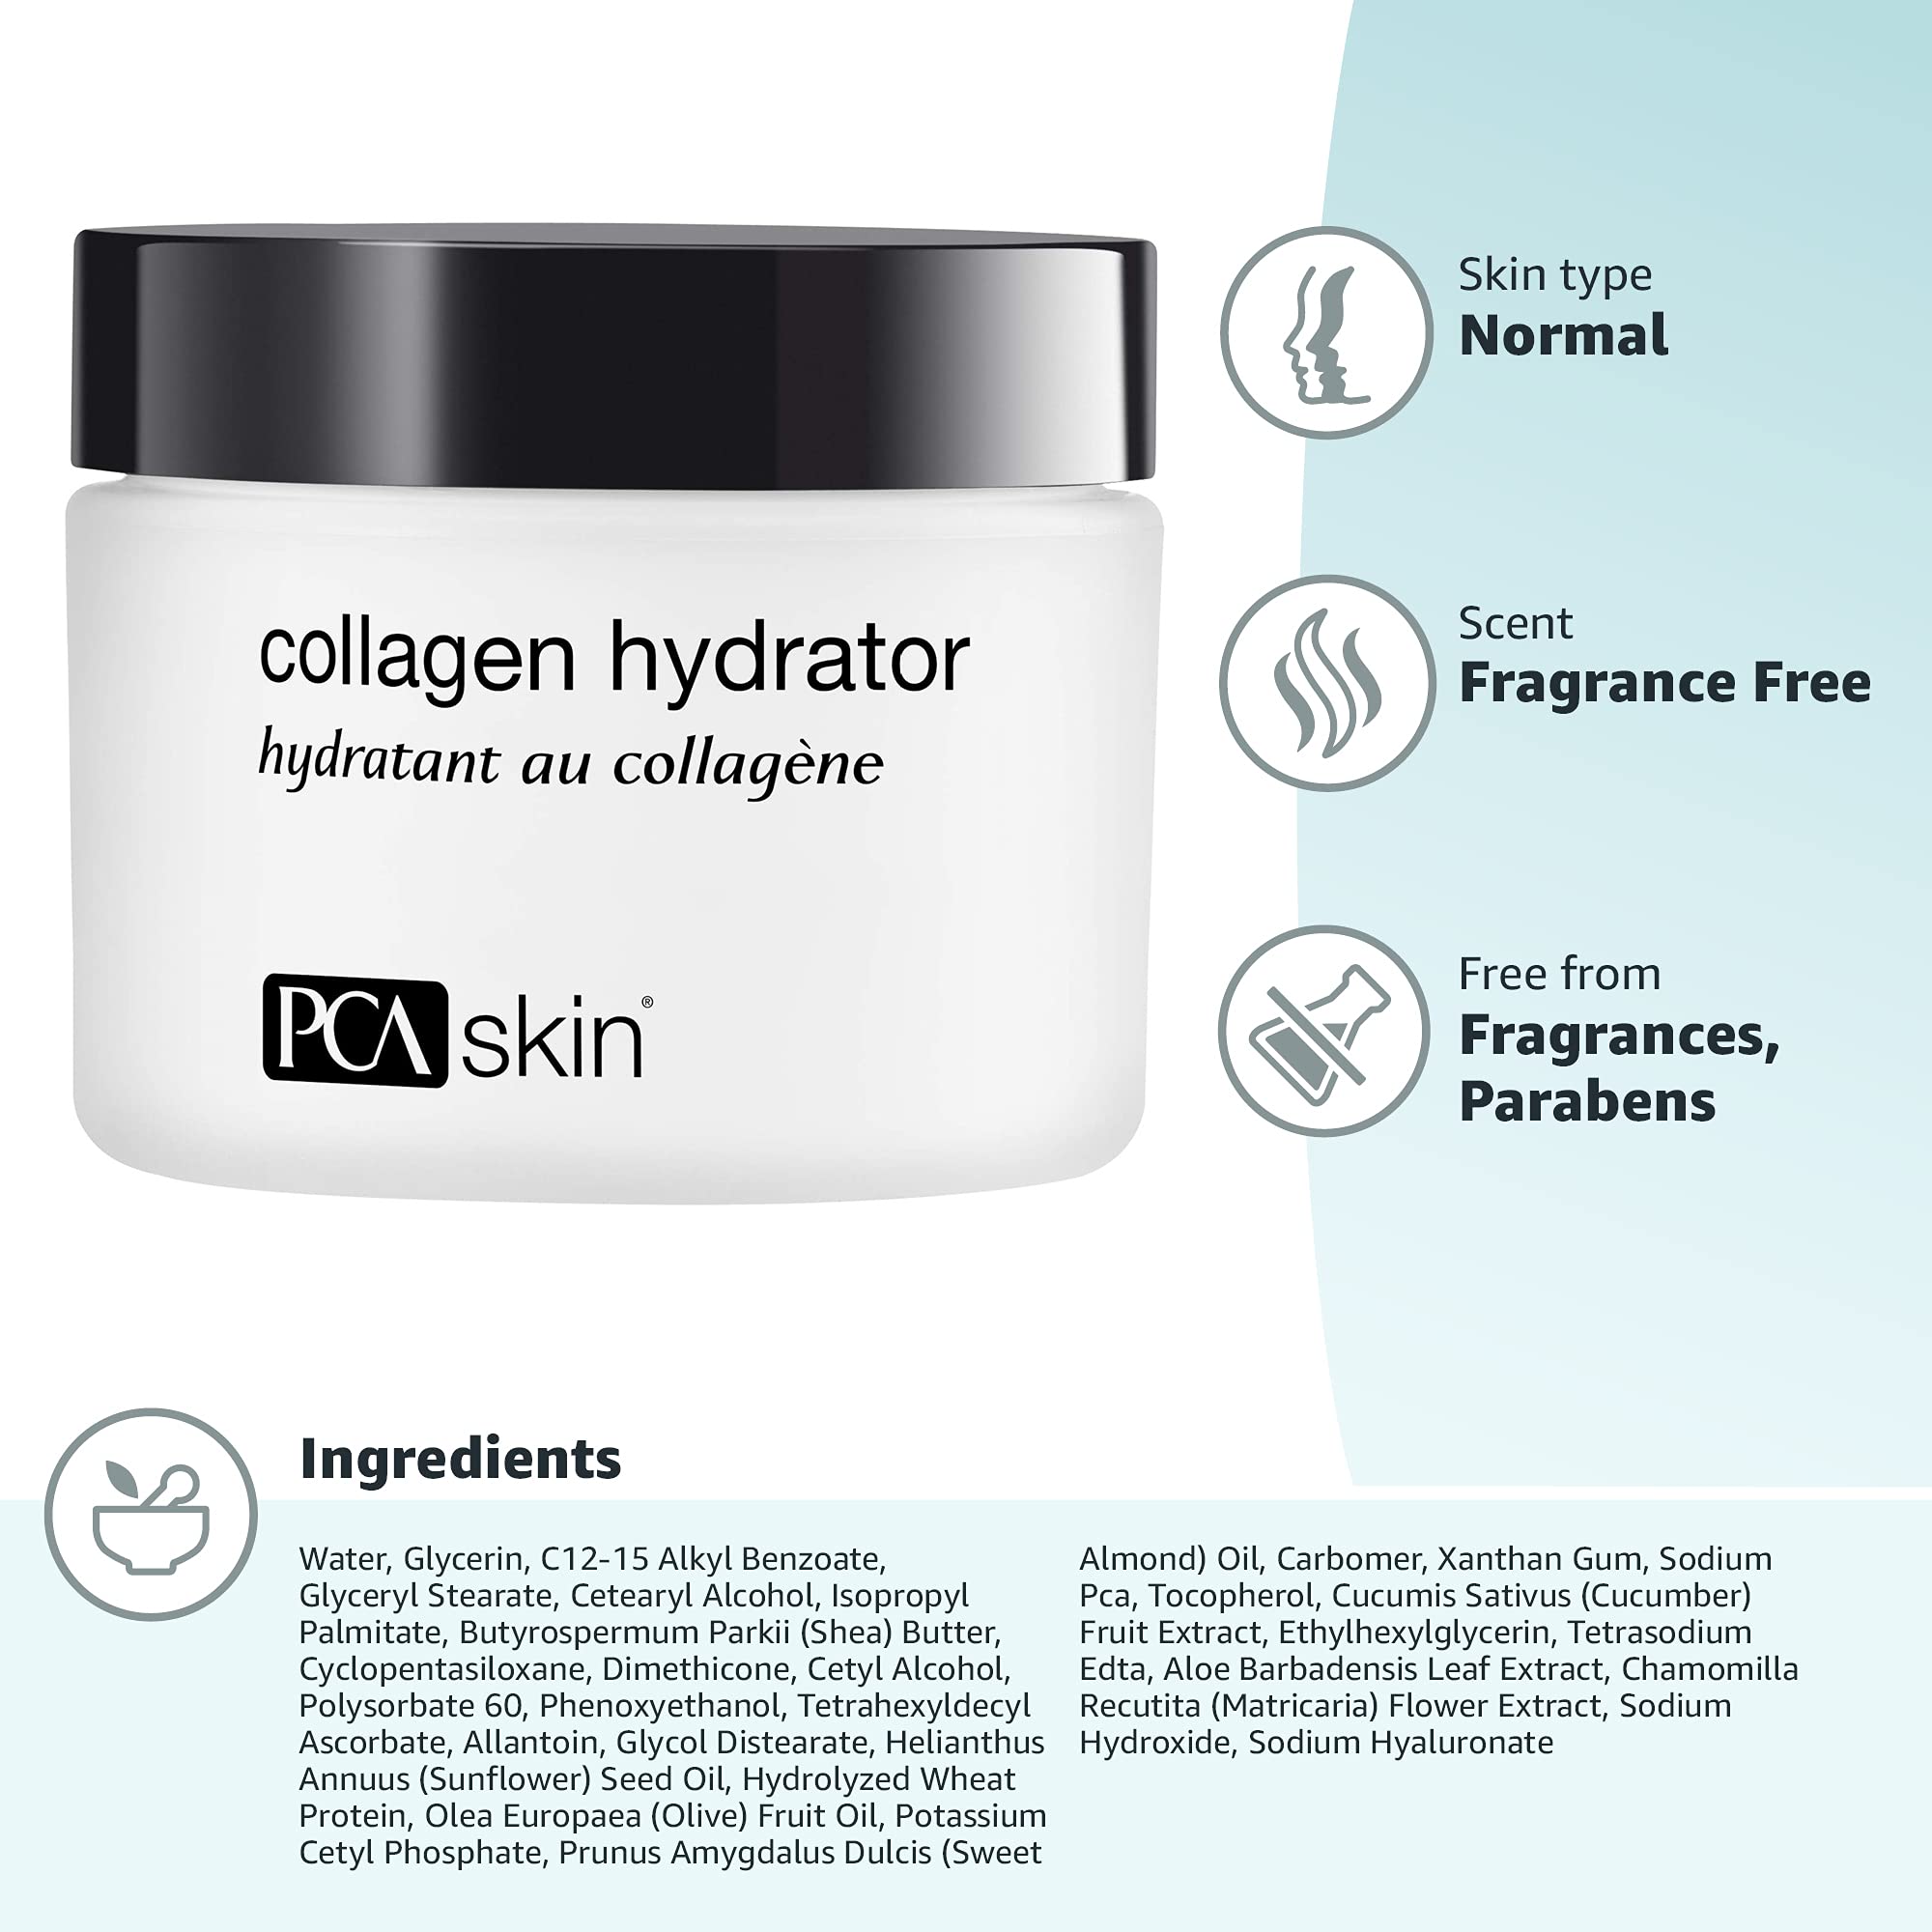 PCA SKIN Collagen Hydrator Night Cream for Women, Hydrating Night Moisturizer Cream for Dry Skin, Made with Shea Butter, Olive Fruit Oil, and Sweet Almond Fruit Extract, 1.7 oz Tub